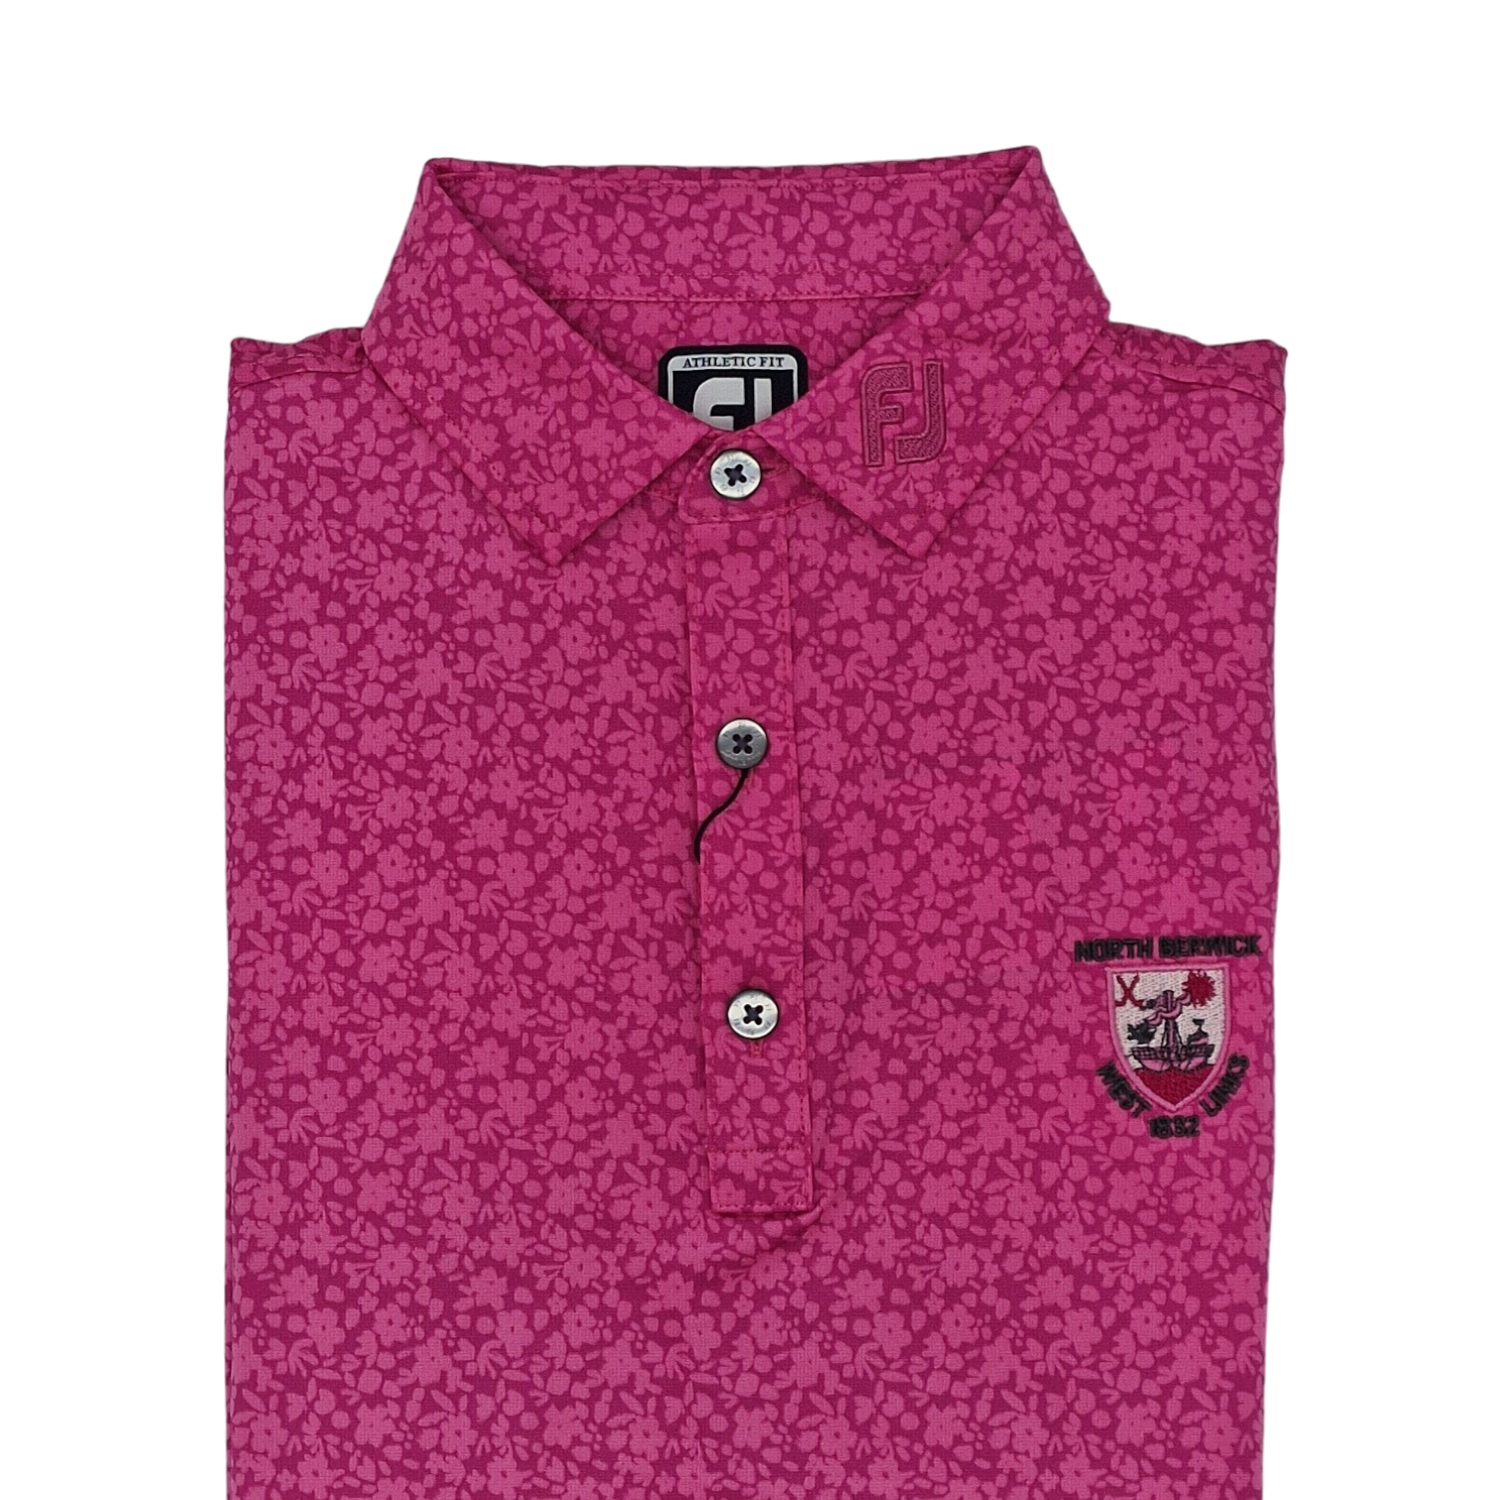 Painted Floral Polo